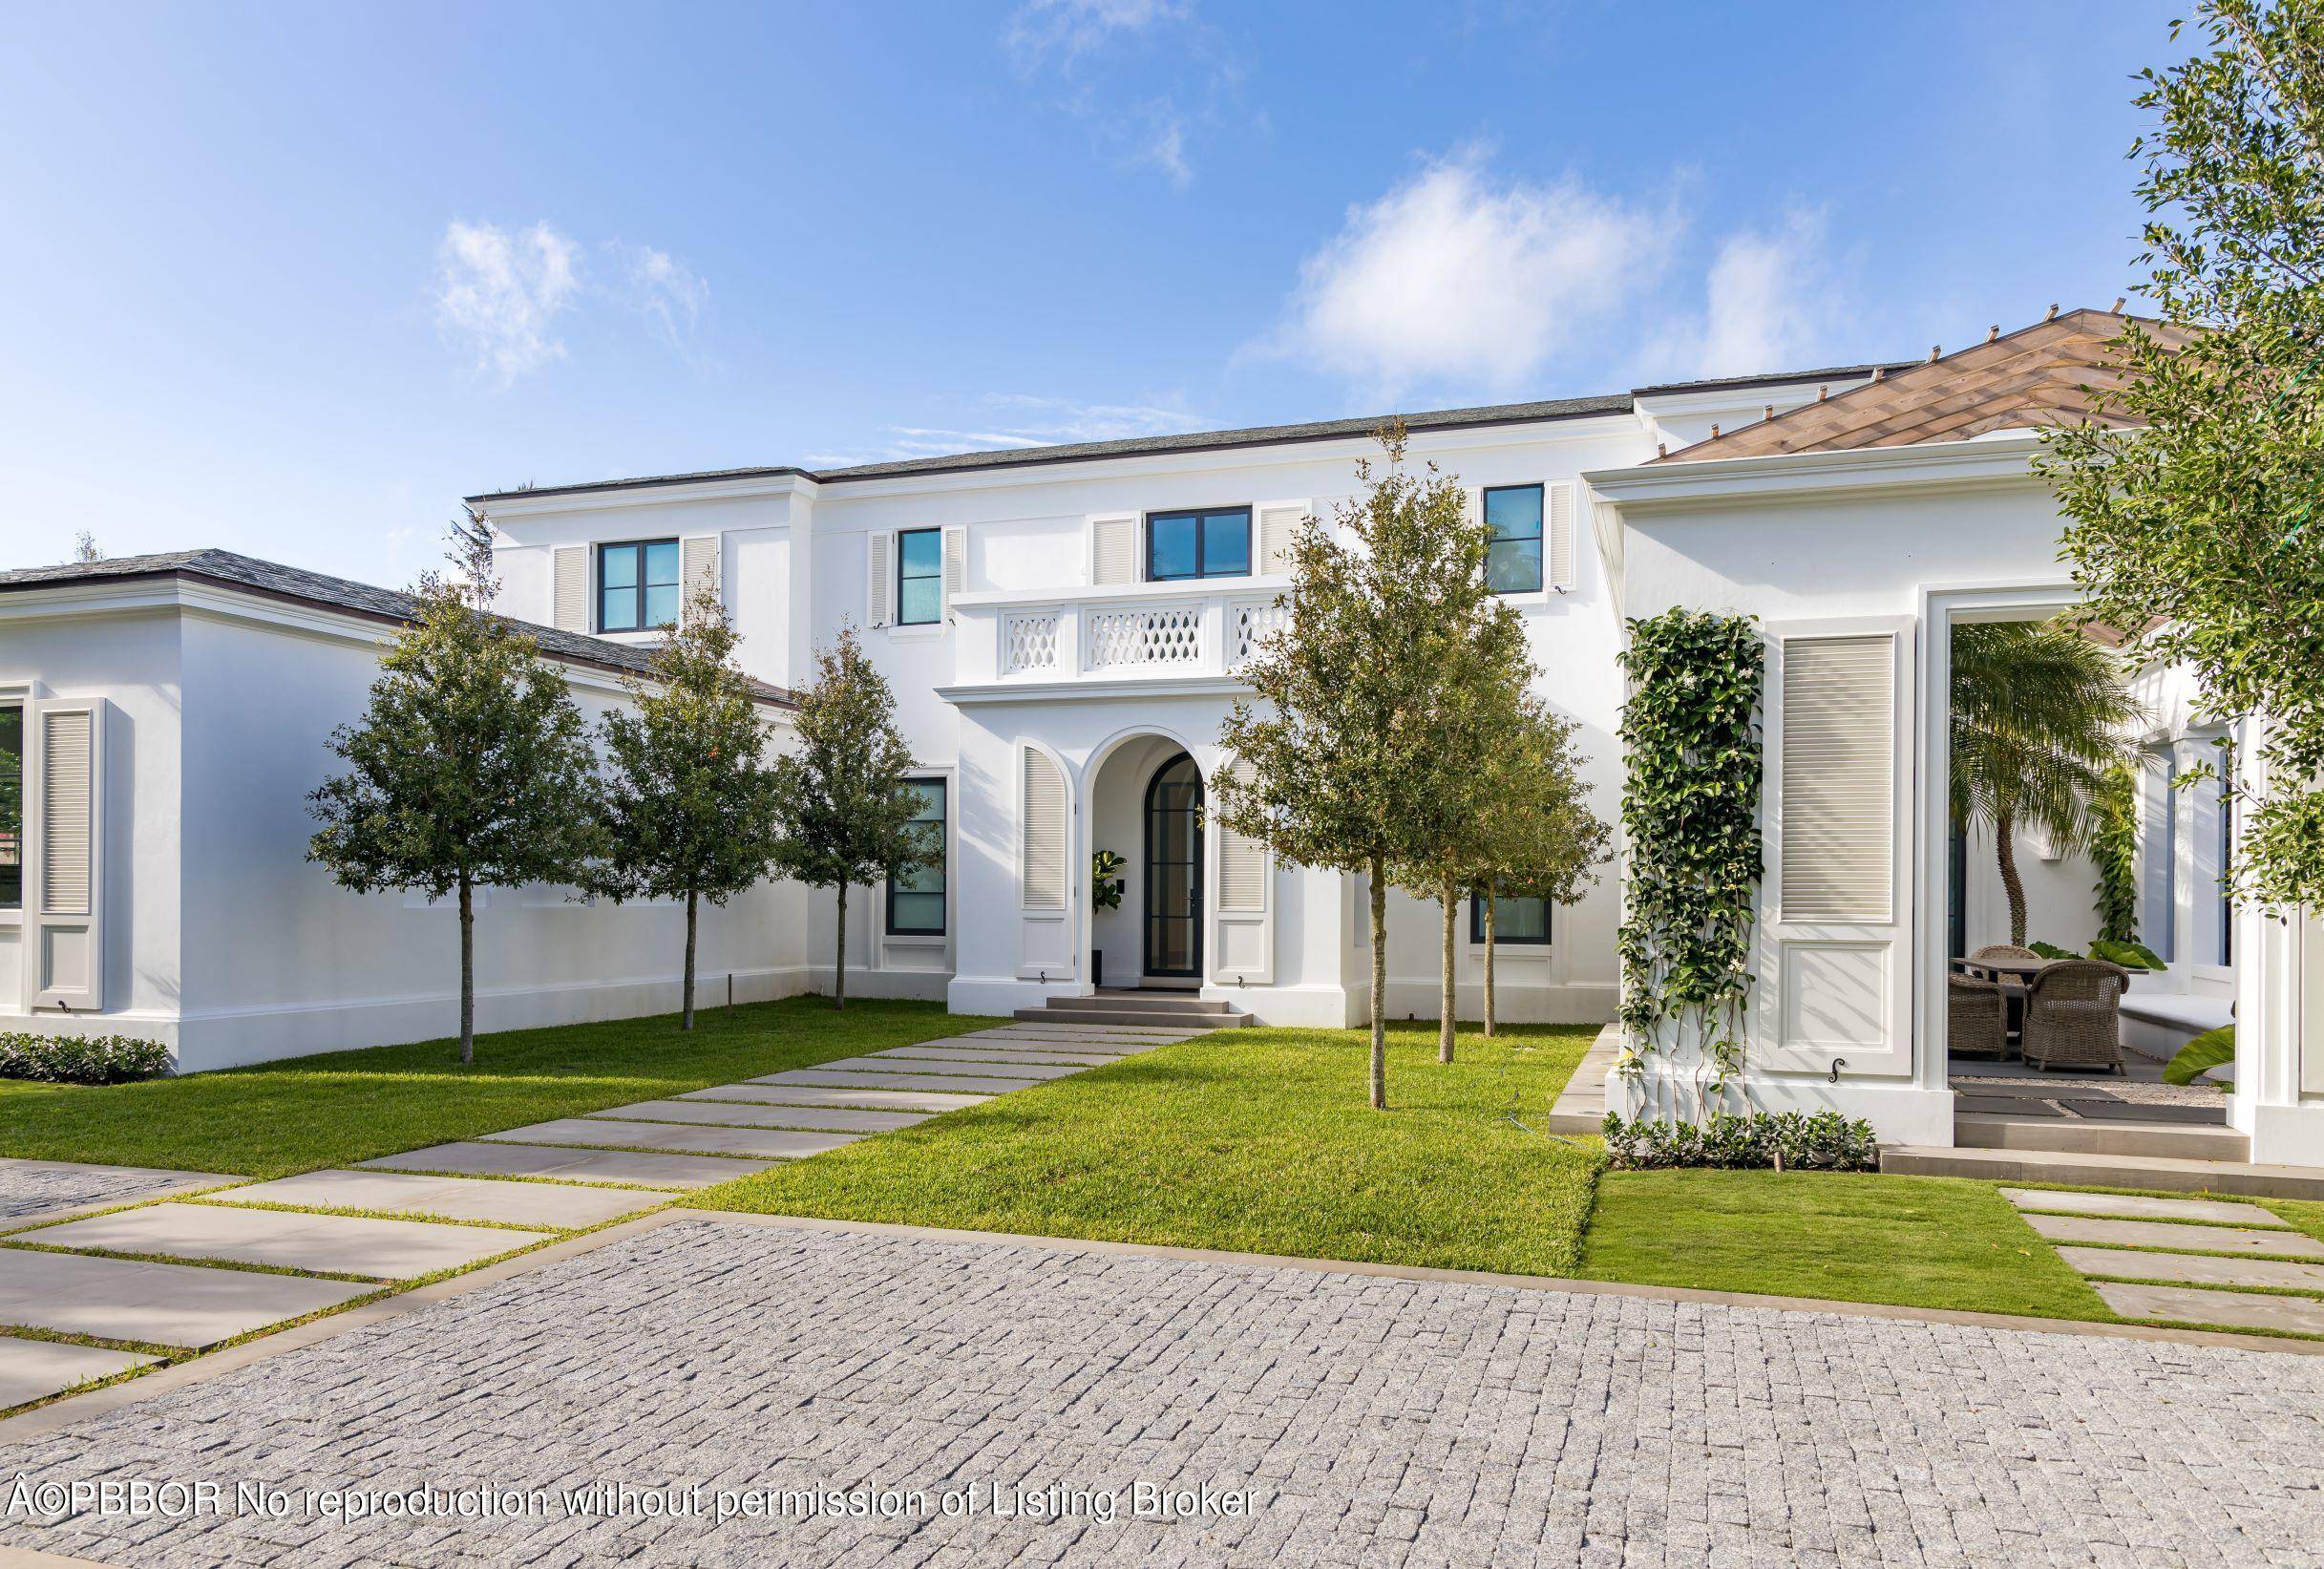 Custom built in 2021, this fresh and bright French Contemporary home is the sublime collaboration between designer Sloan Mauran, JF Brennan Design, Portuondo Perotti Architects, and Keith Williams of Nievera ...